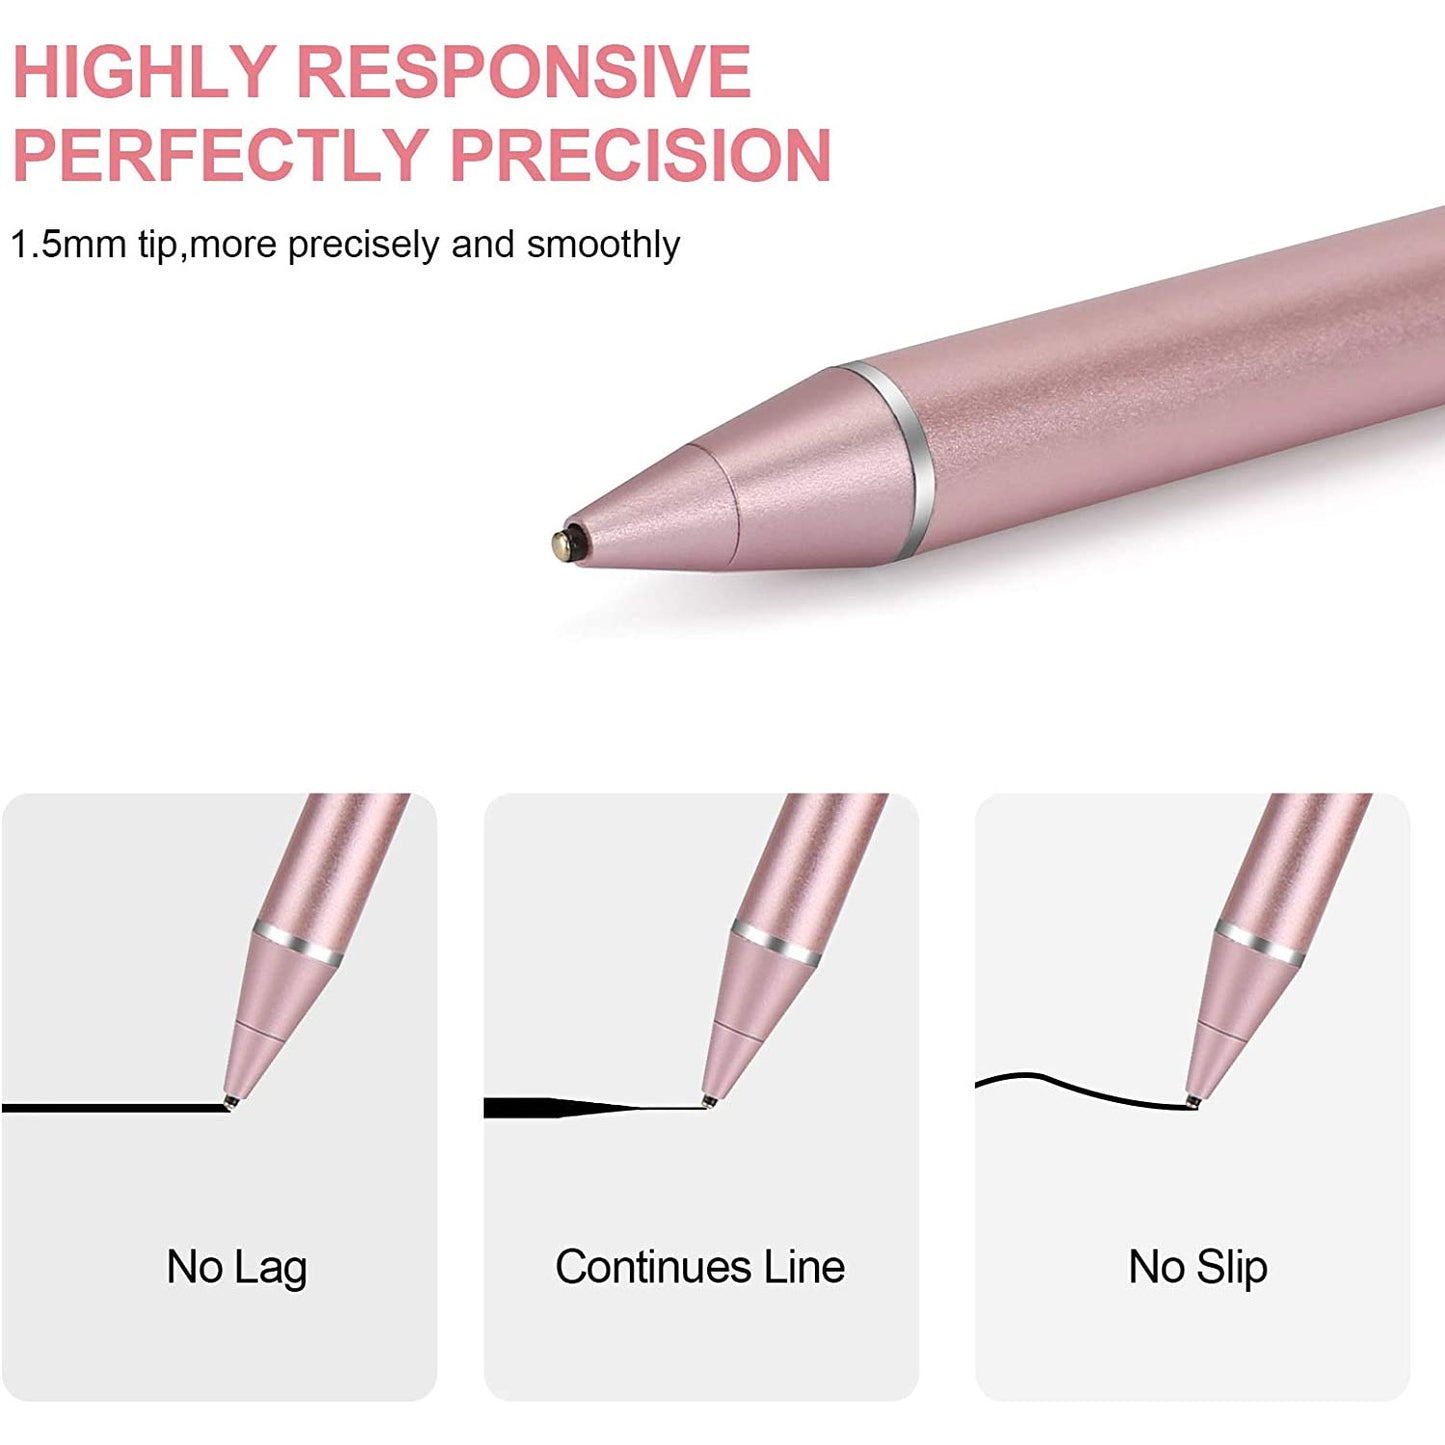 Active Stylus Pen Digital Capacitive Touch Rechargeable Palm Rejection - ONG78